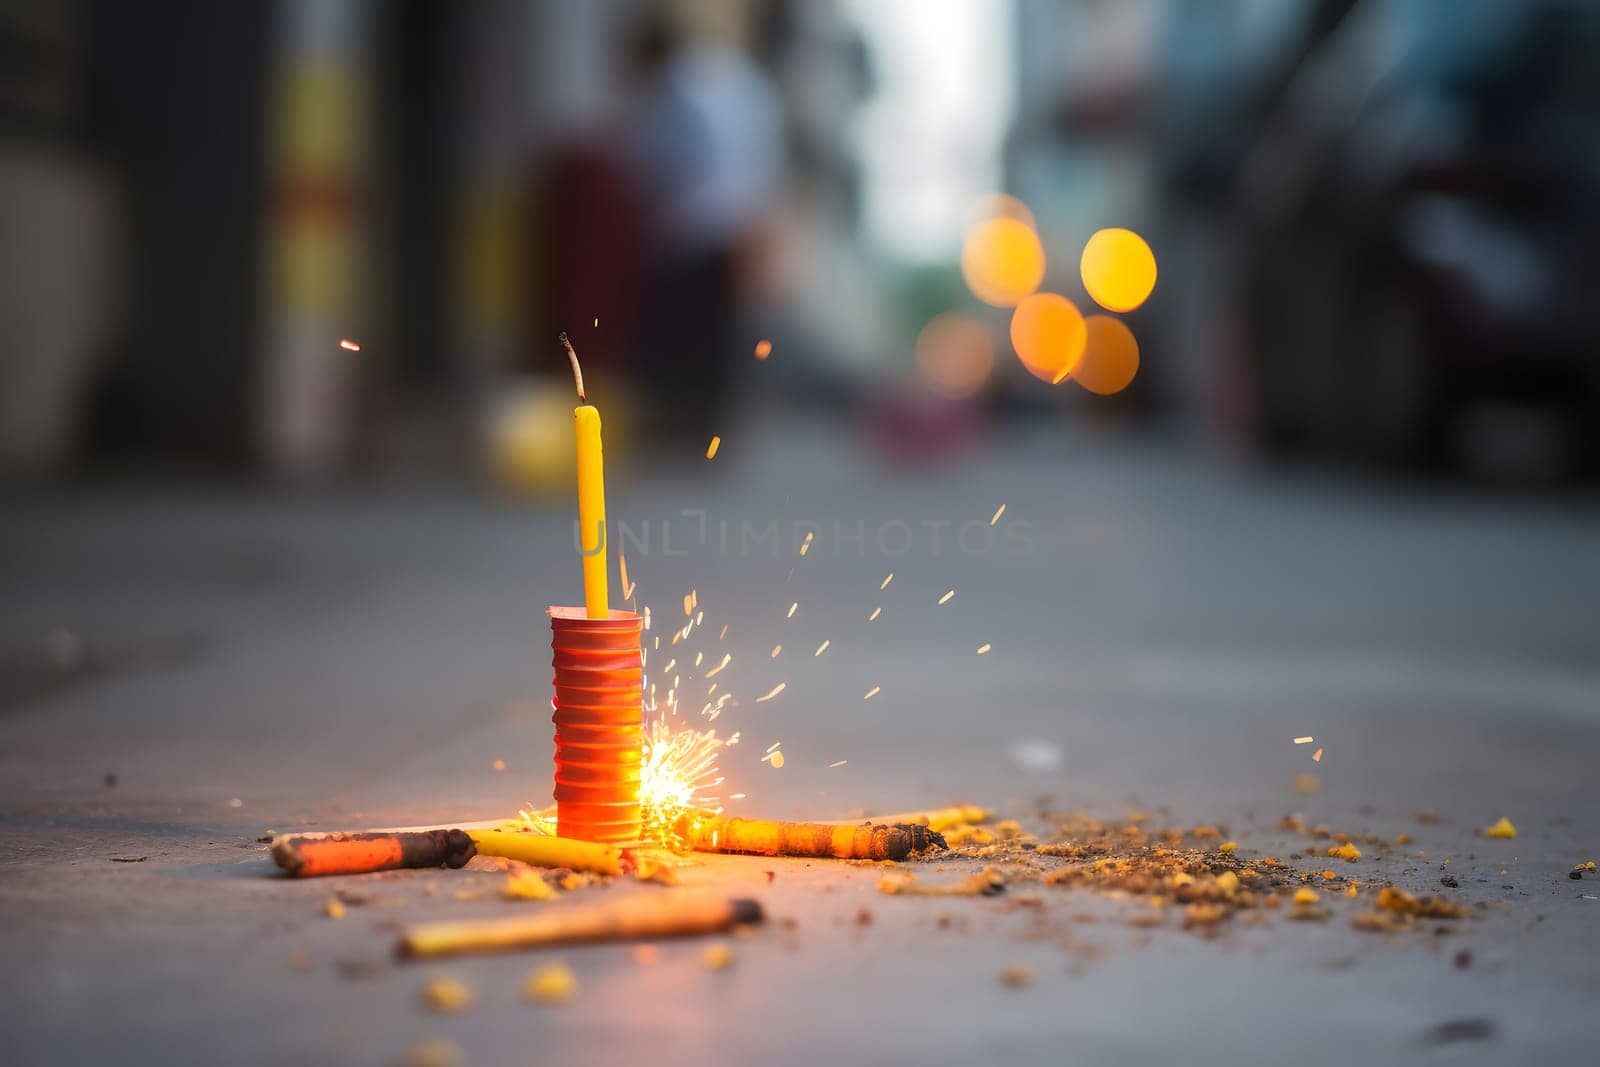 Happy Diwali - Lit diya lamp on street with firecrackers. Neural network generated in May 2023. Not based on any actual person, scene or pattern.